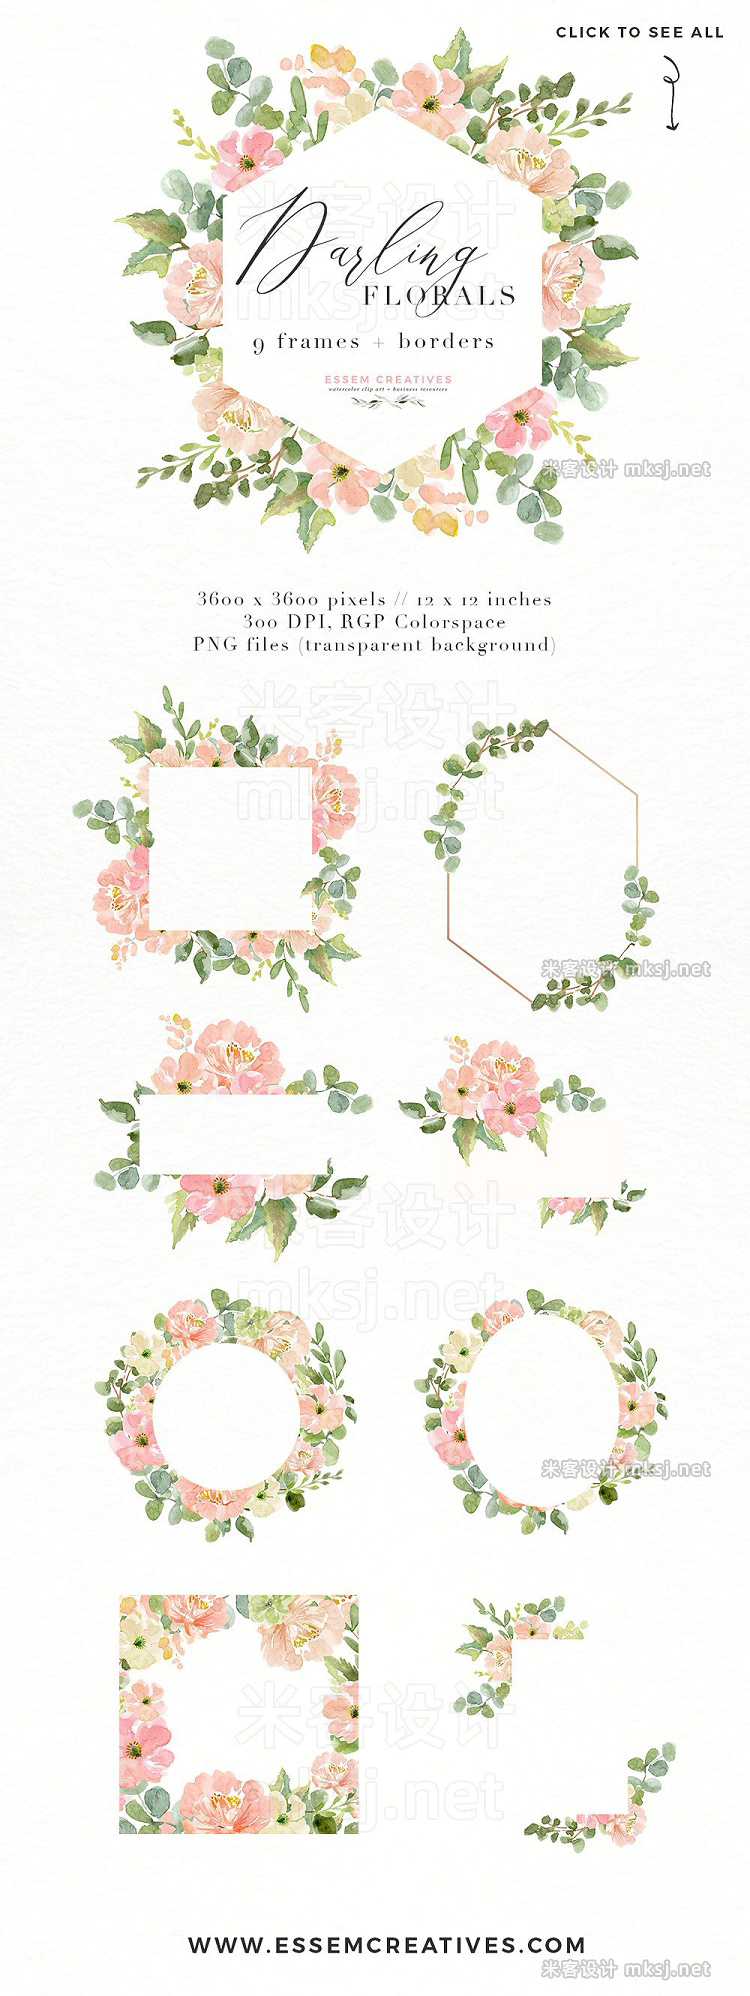 png素材 Wedding Invite Watercolor Flower PNG